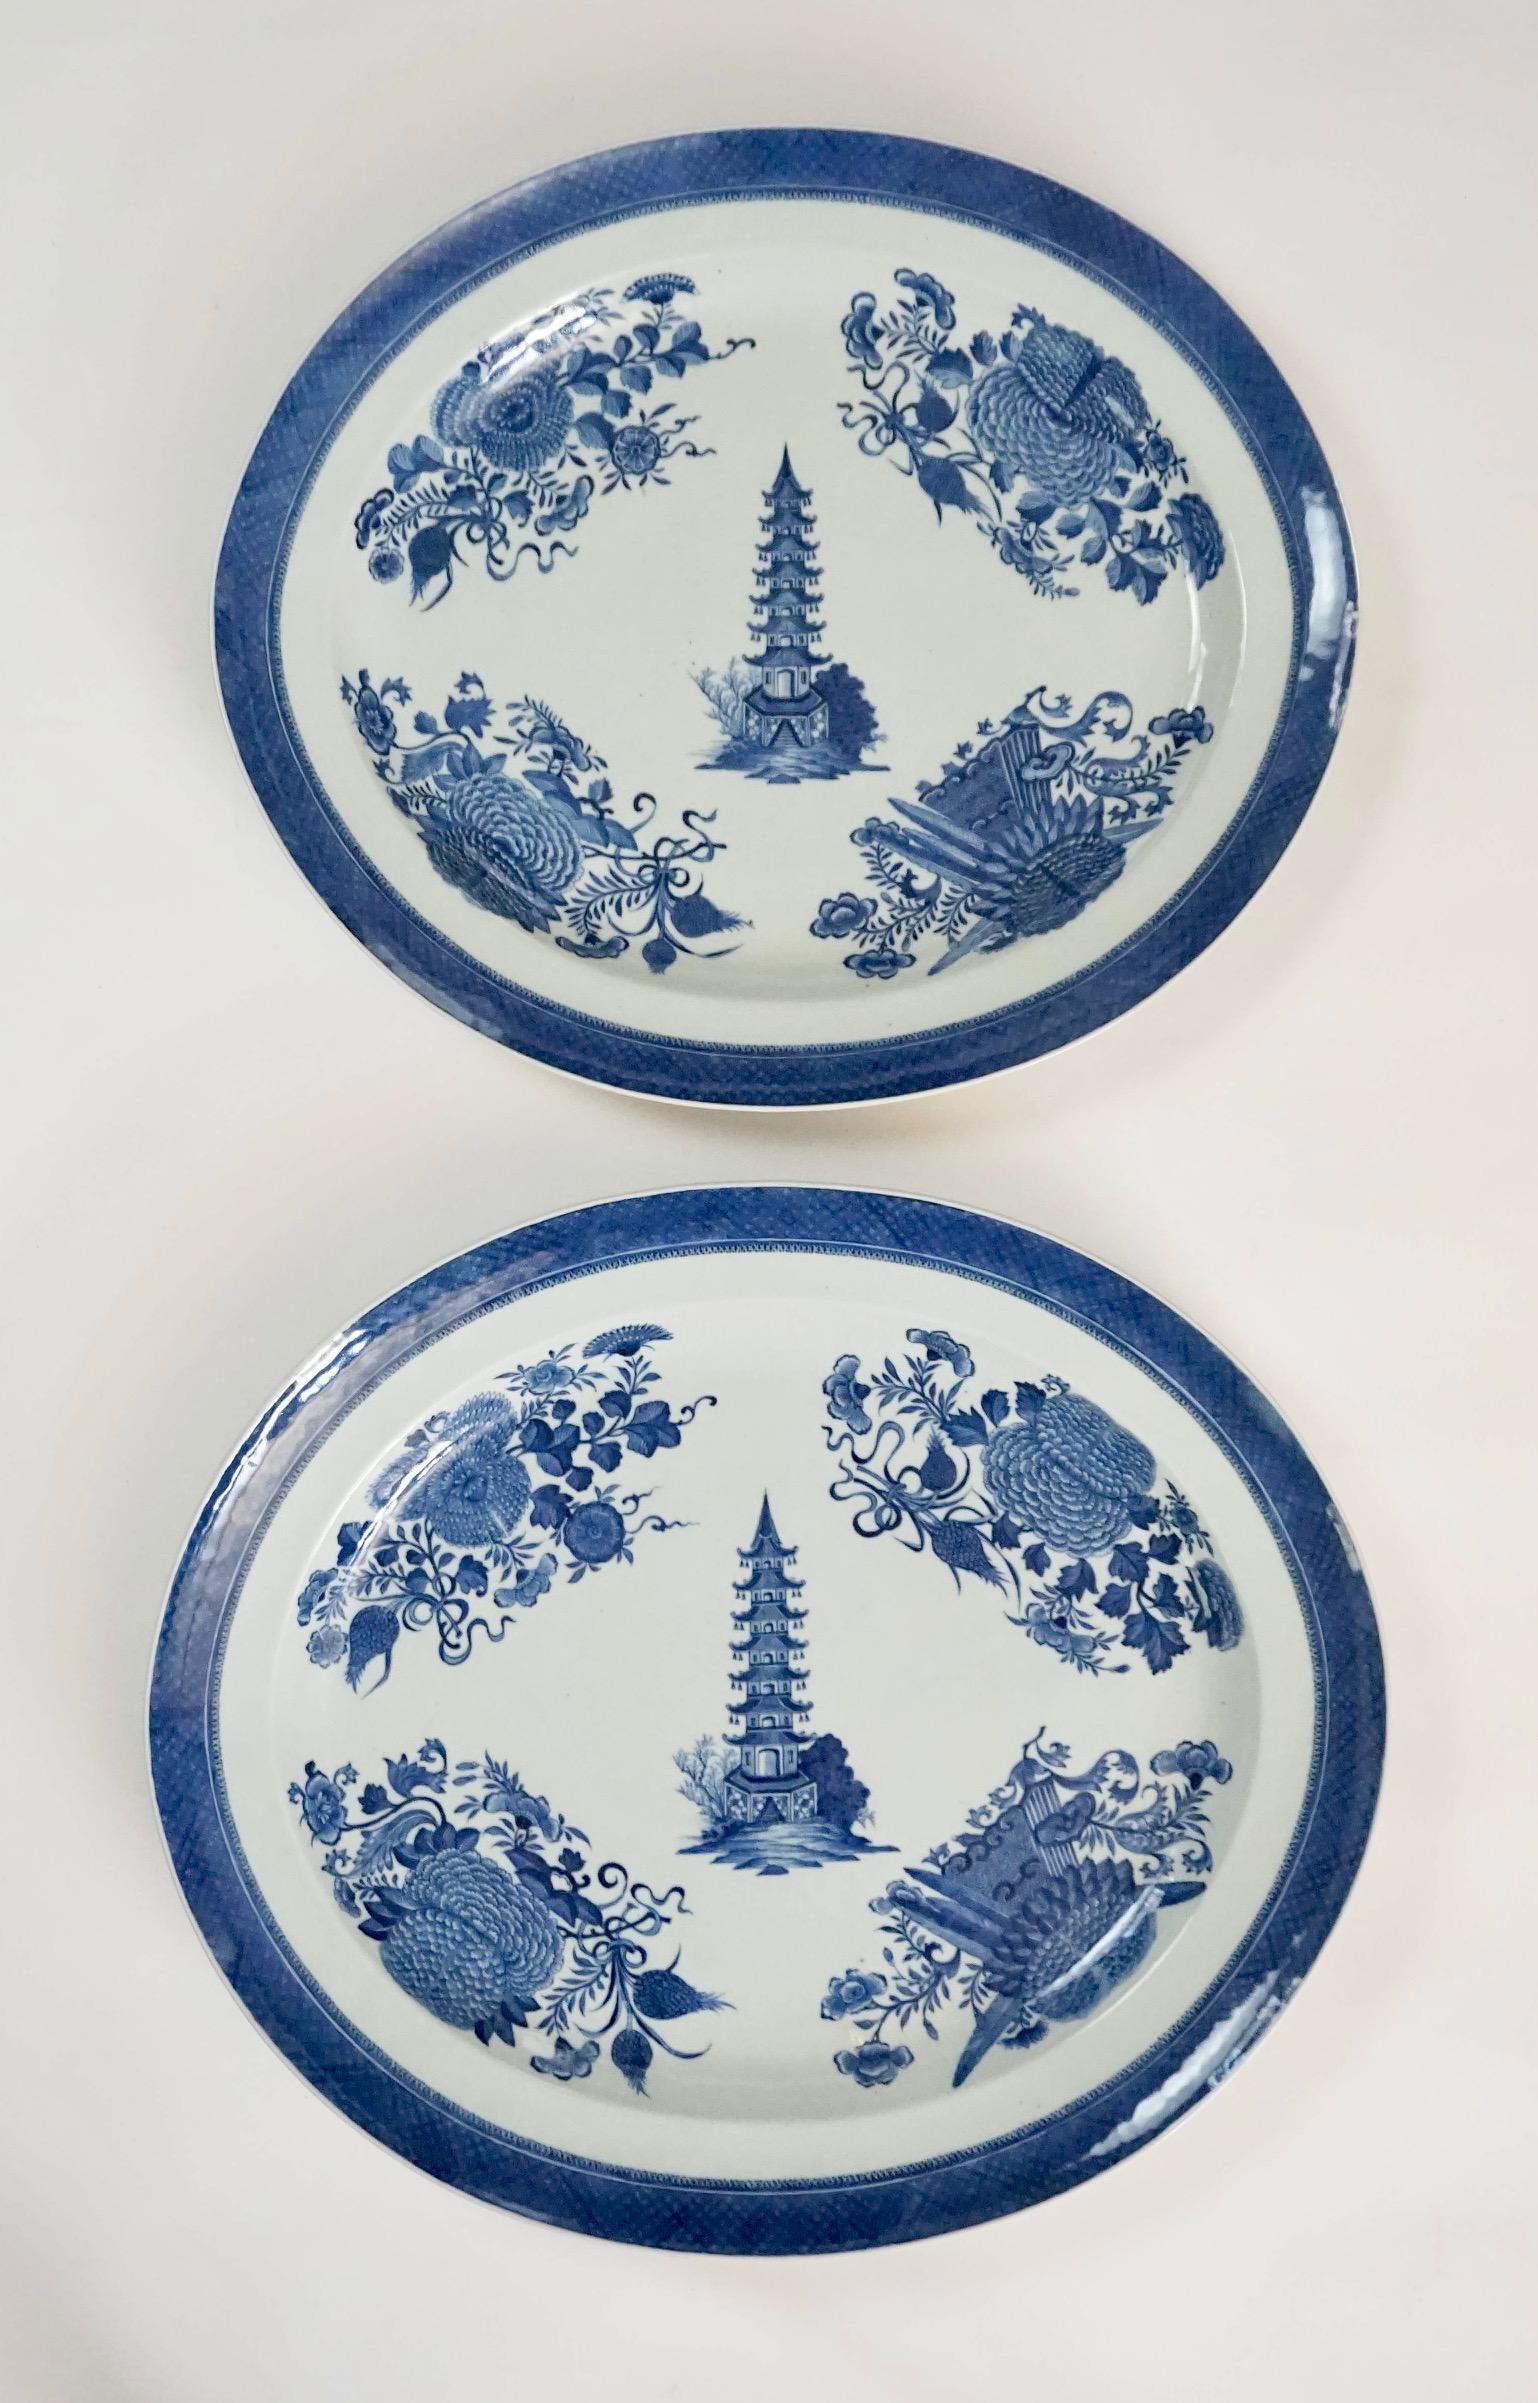 An extremely rare and wonderful set of two blue-and-white Chinese export porcelain graduated platters of large size from the famous 